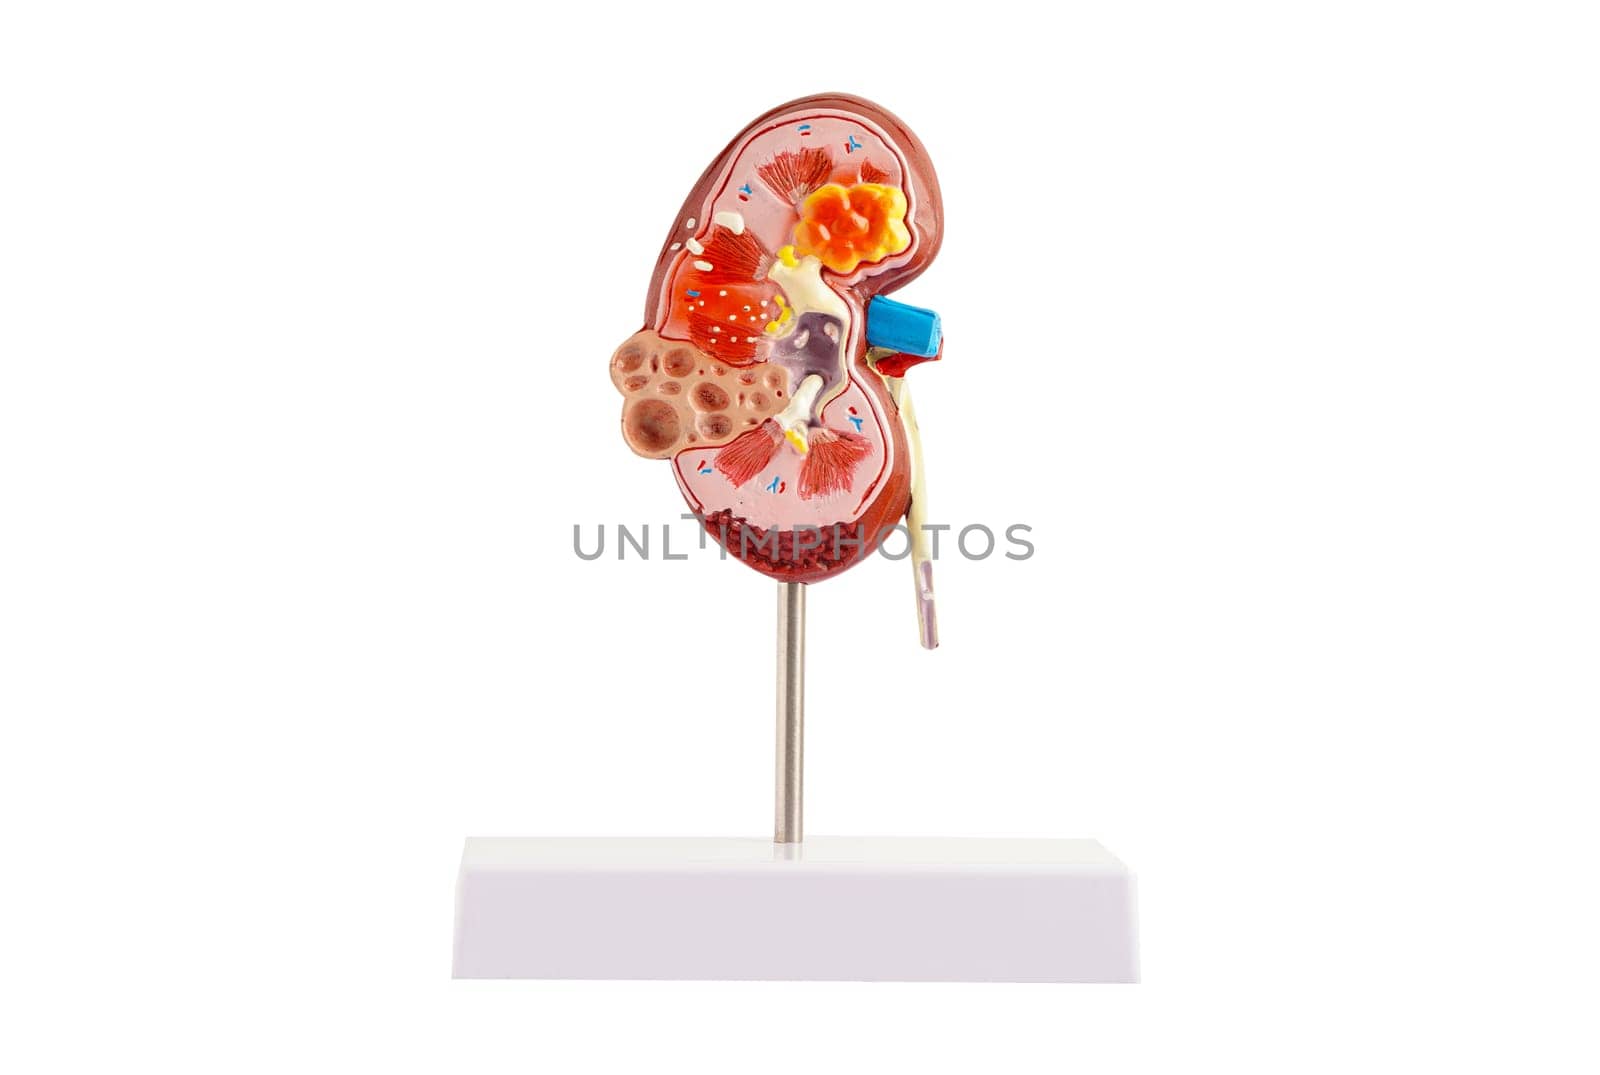 Kidney model isolated on white background with clipping path. Chronic kidney disease, treatment urinary system, urology, Estimated glomerular filtration rate eGFR.